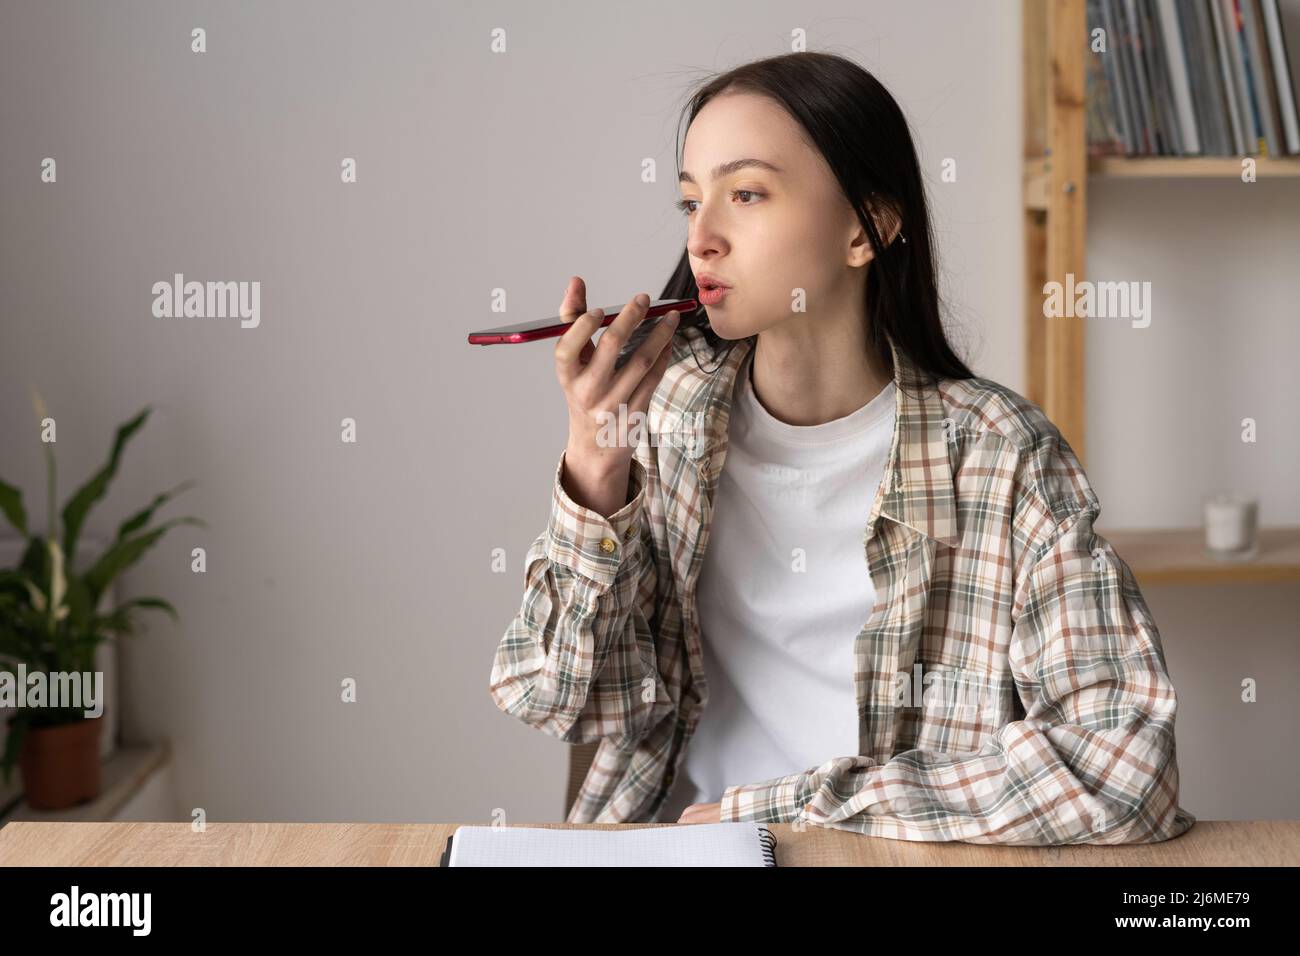 Beautiful caucasian teenage girl giving voice commands to virtual assistant on smartphone, talking while recording audio messages, using mobile phone Stock Photo